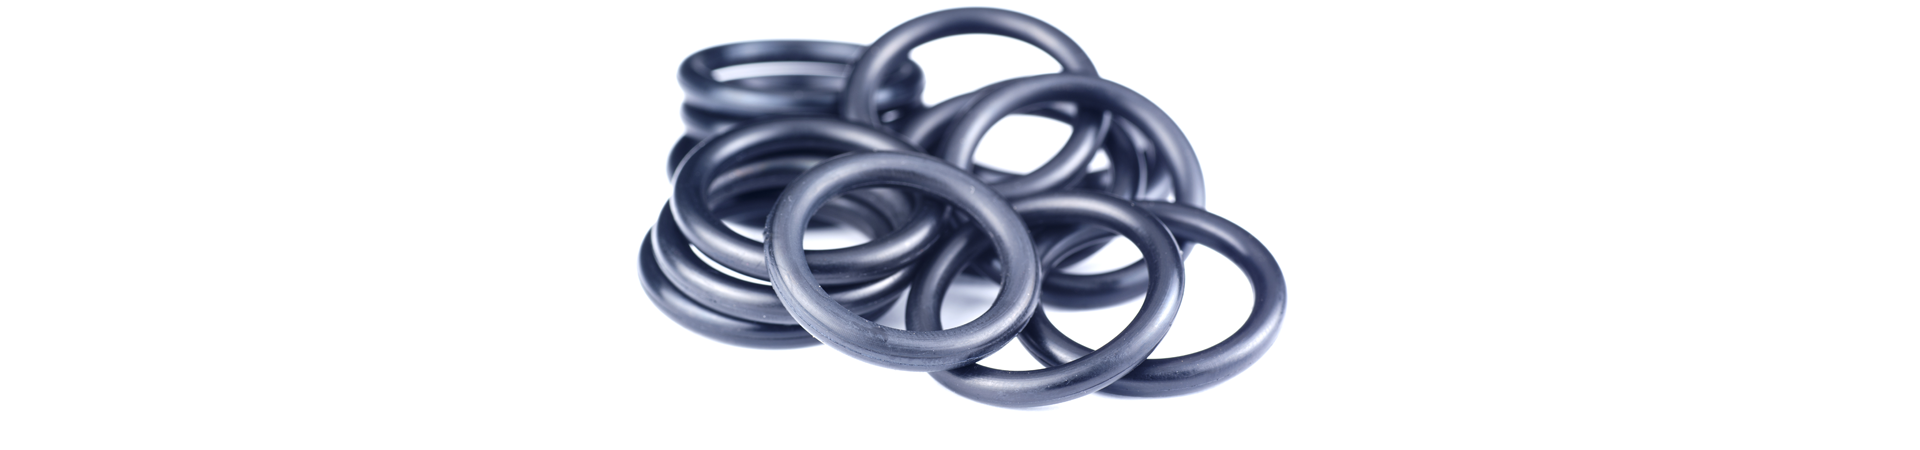 stack of custom molded o-rings mykin has manufactured